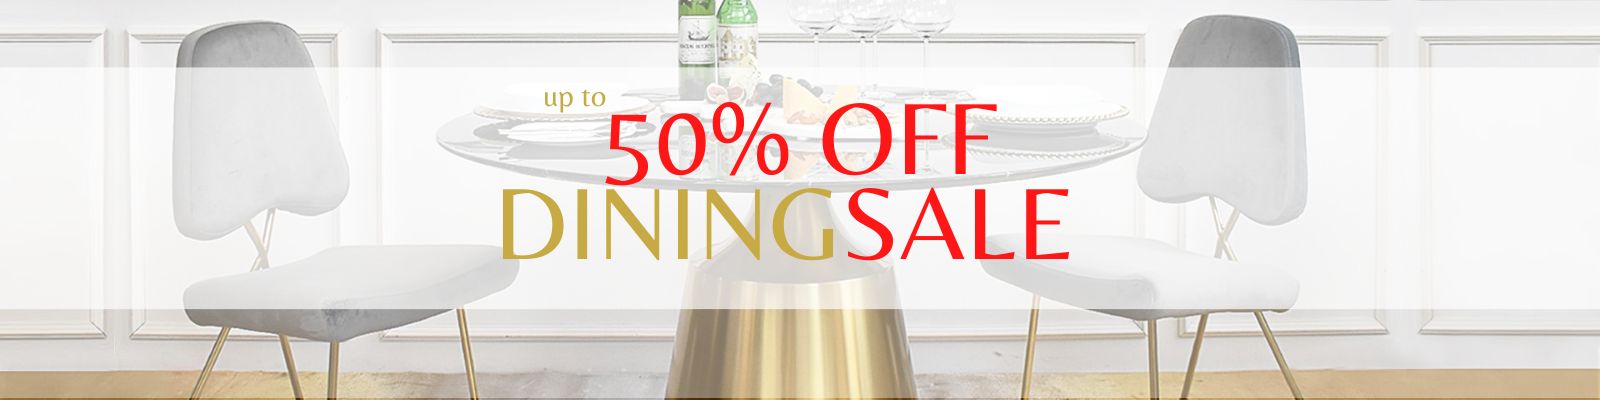 Dining Room Furniture & Decor Sale - Up to 50% Off